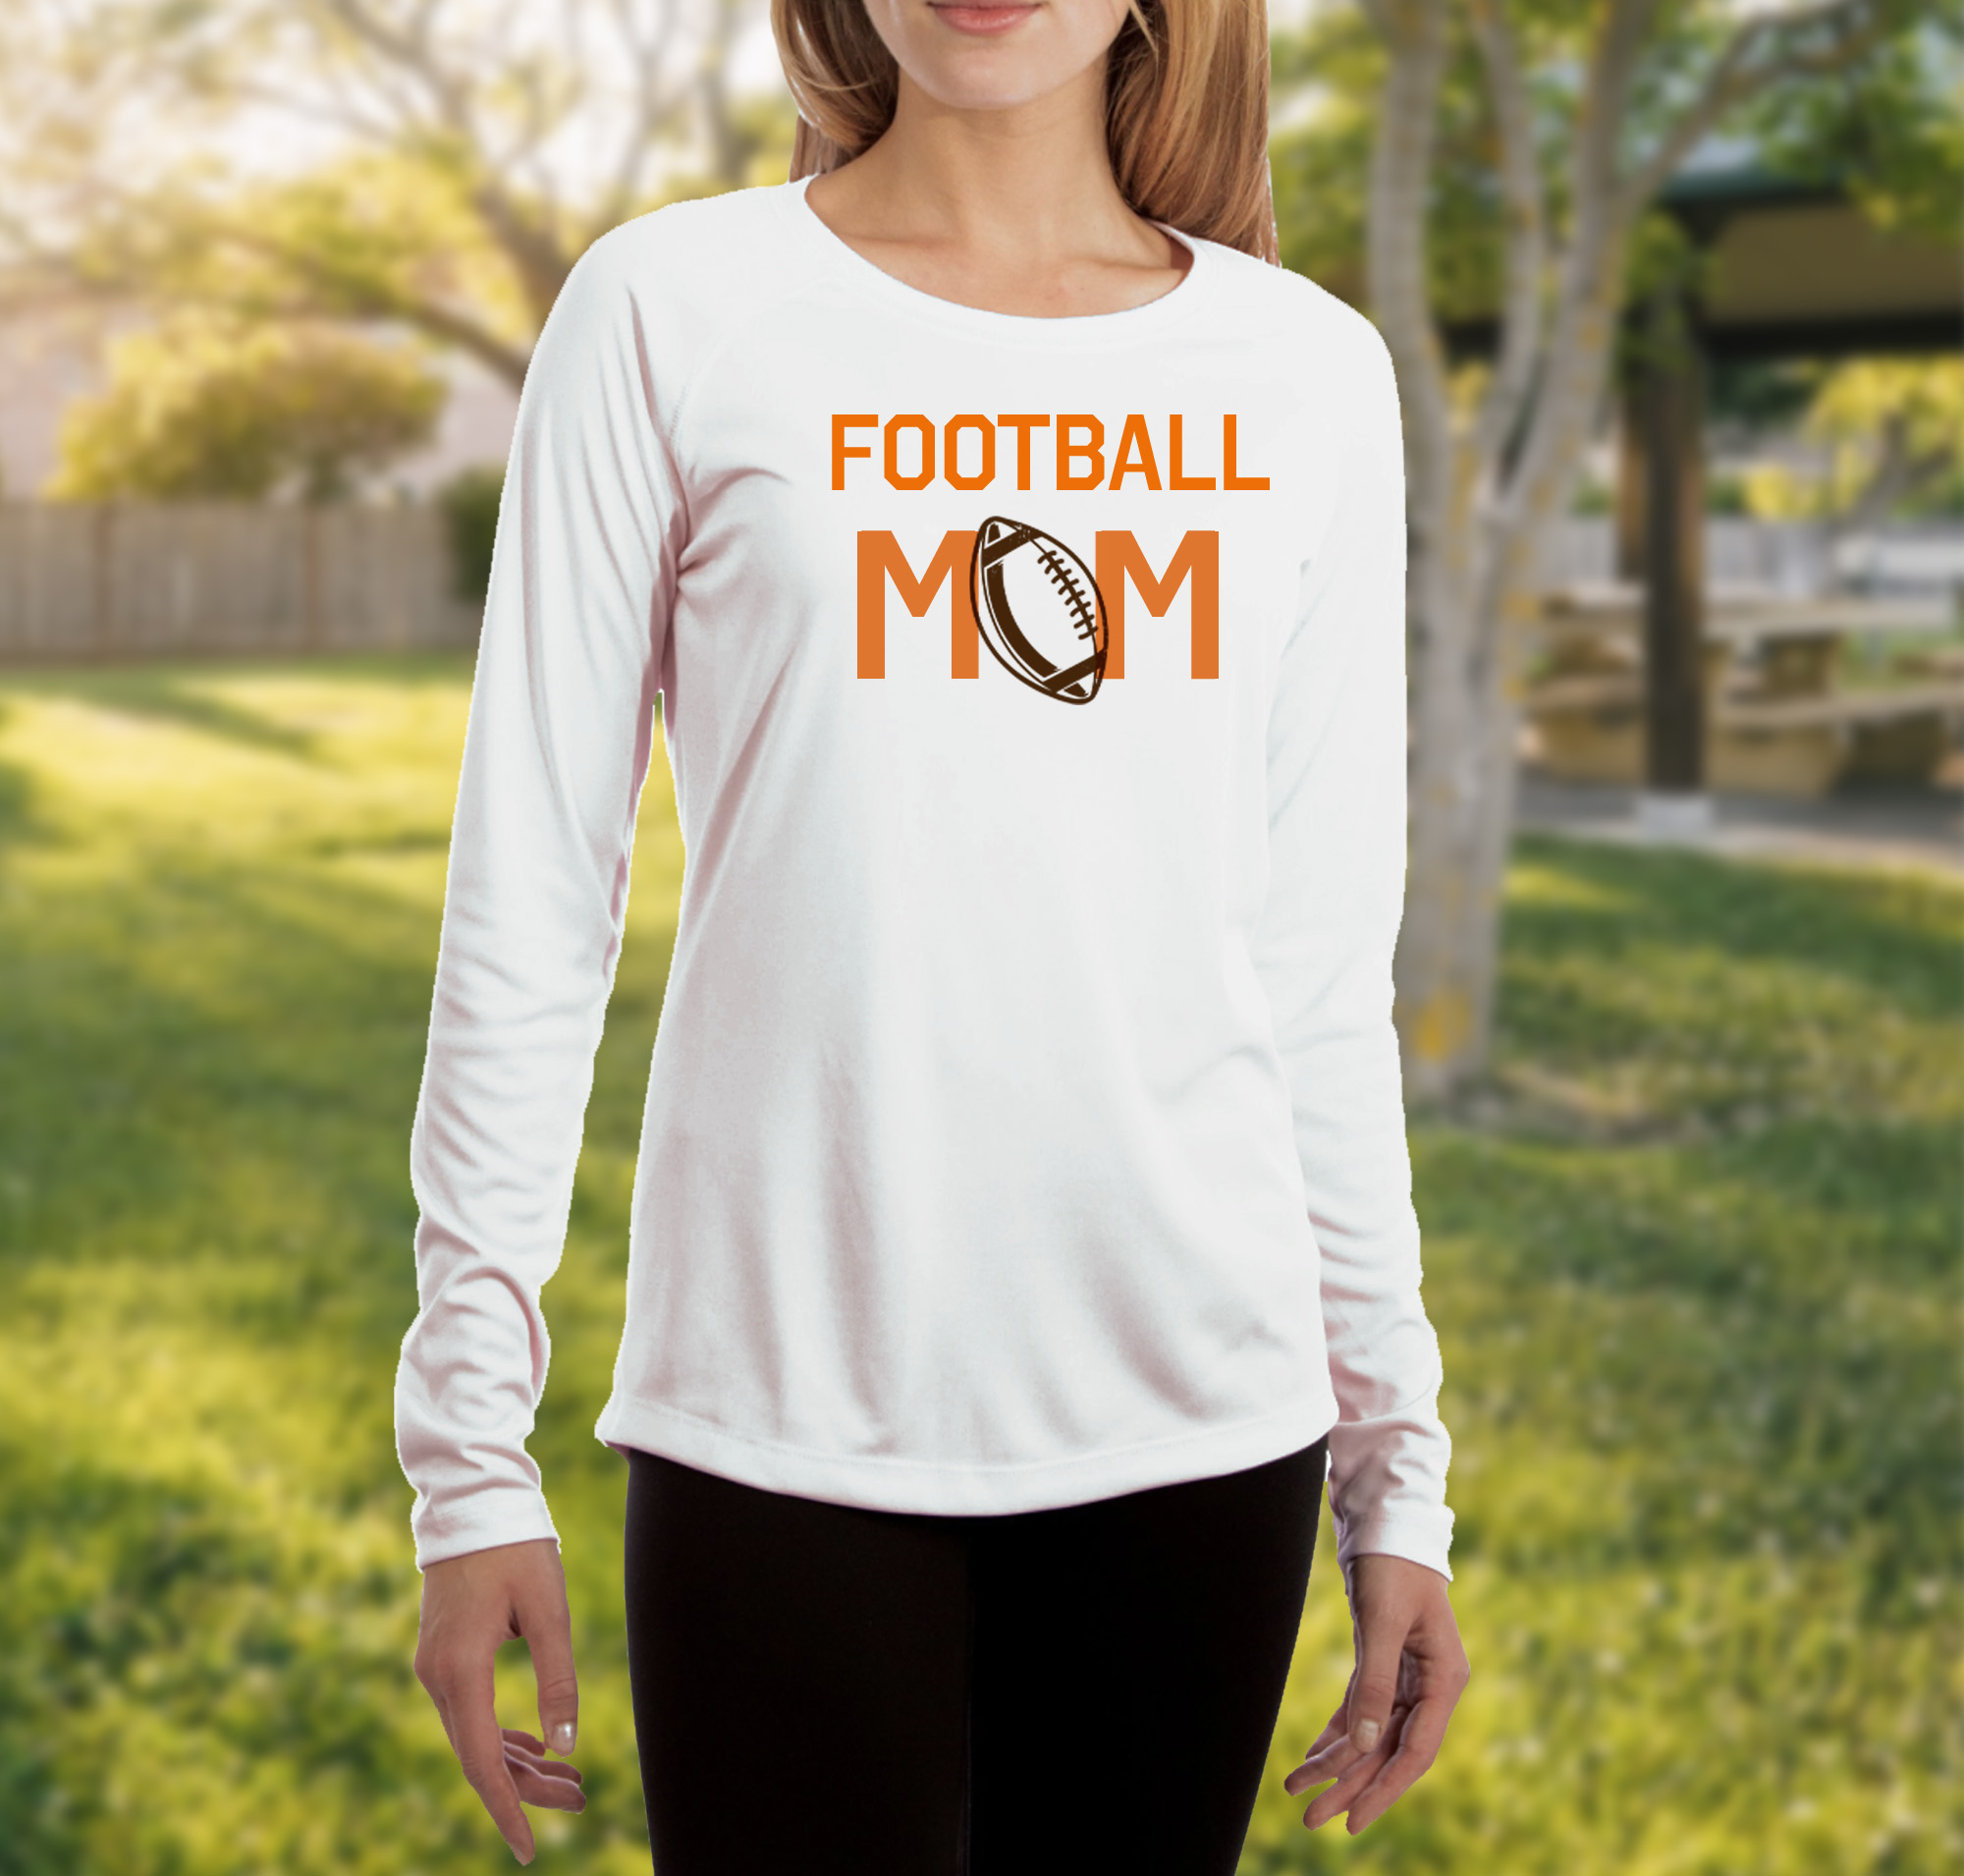 woman outside wearing personalized long sleeve shirt that says football mom